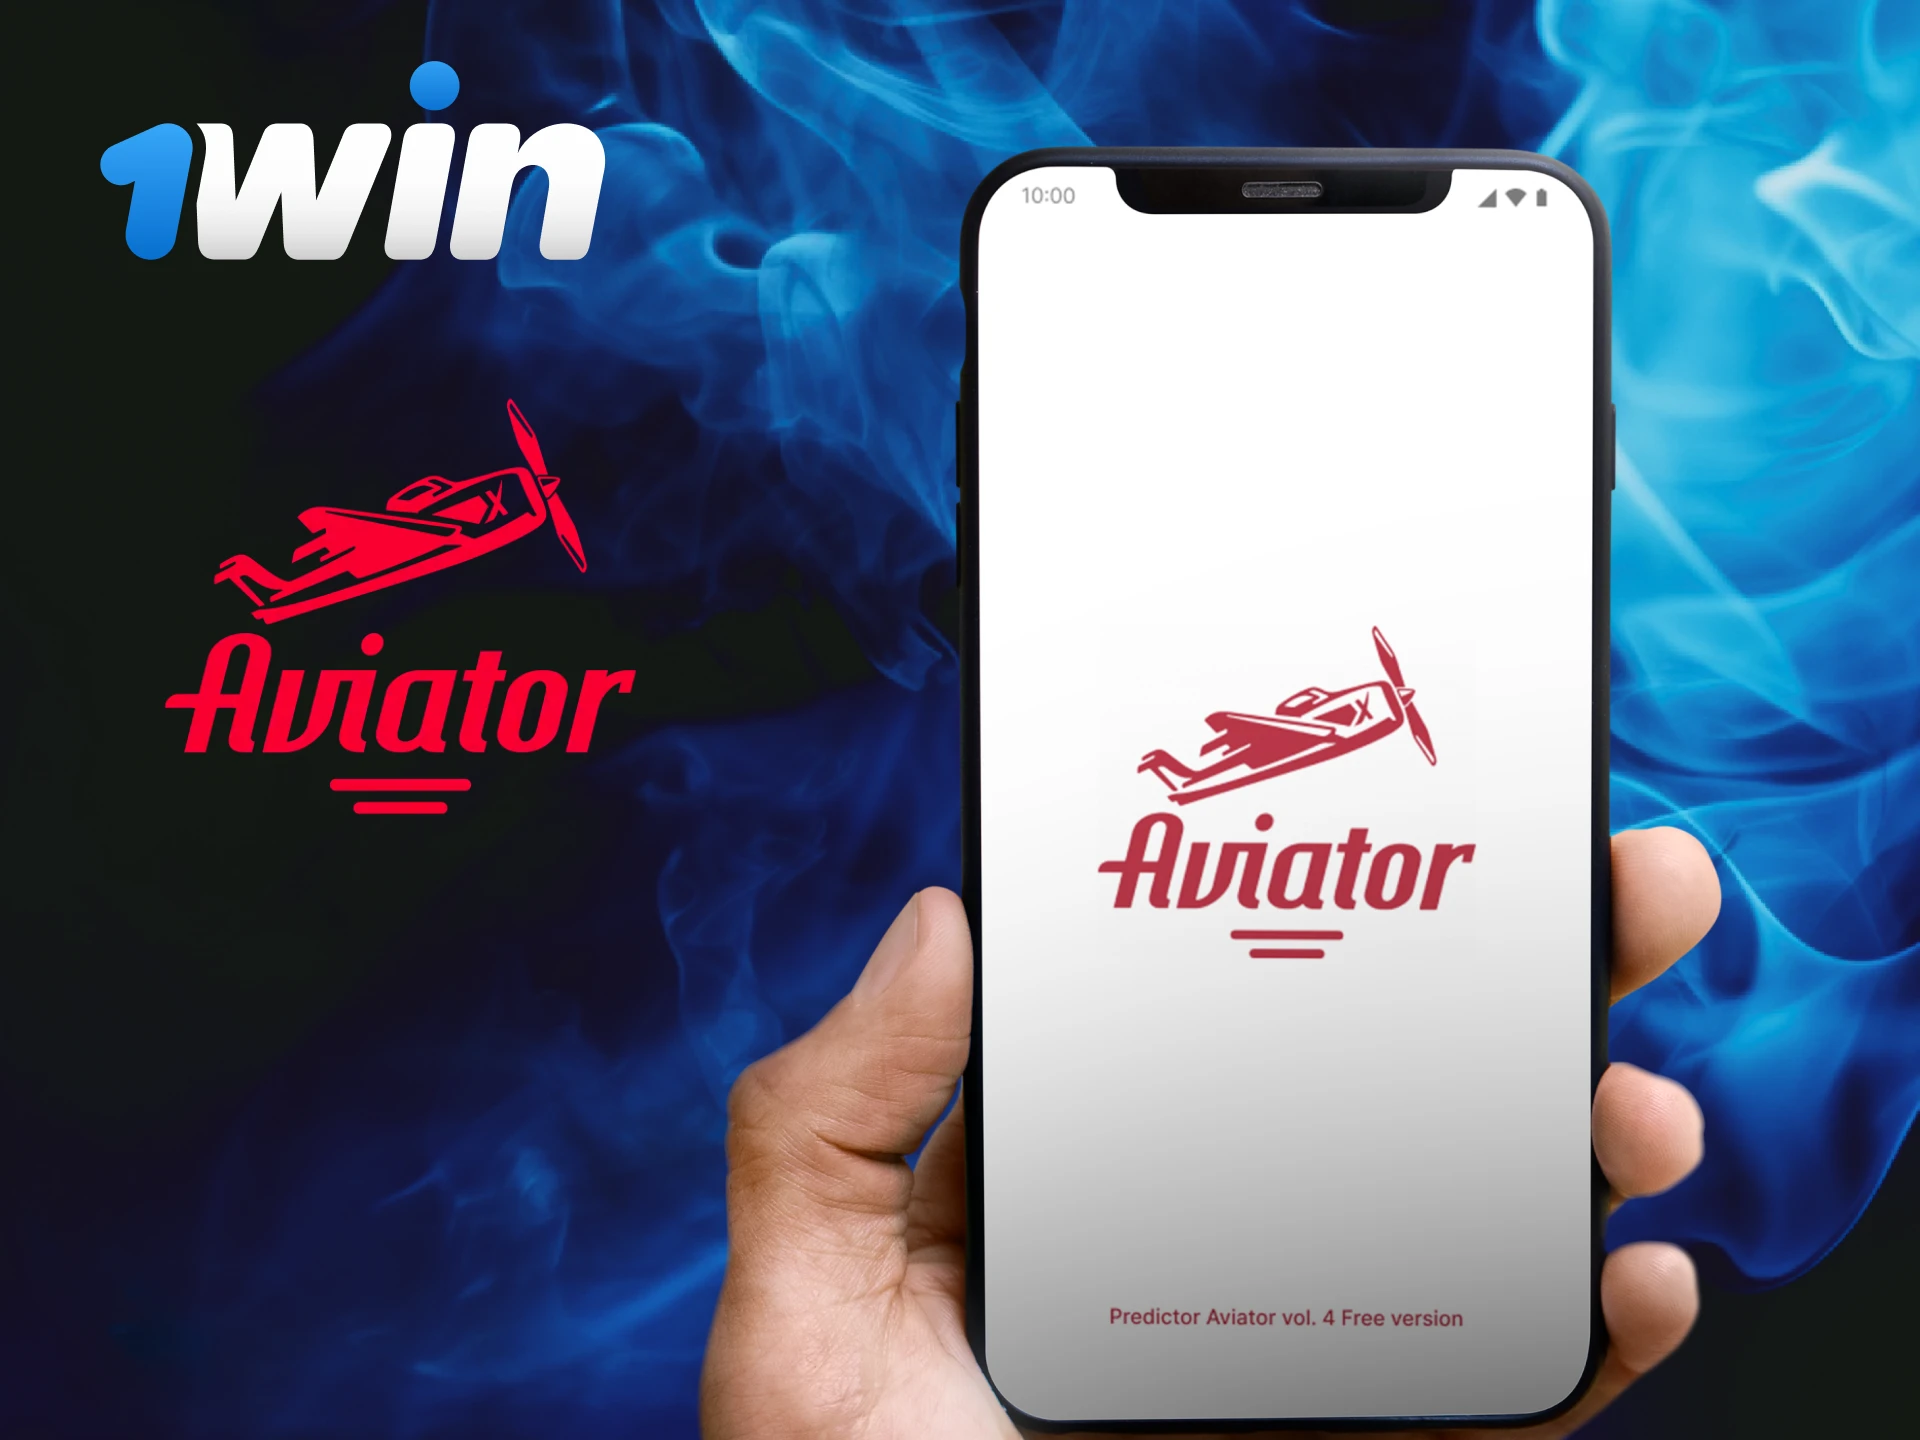 Why do you need a predictor for the Aviator game at the 1win casino.